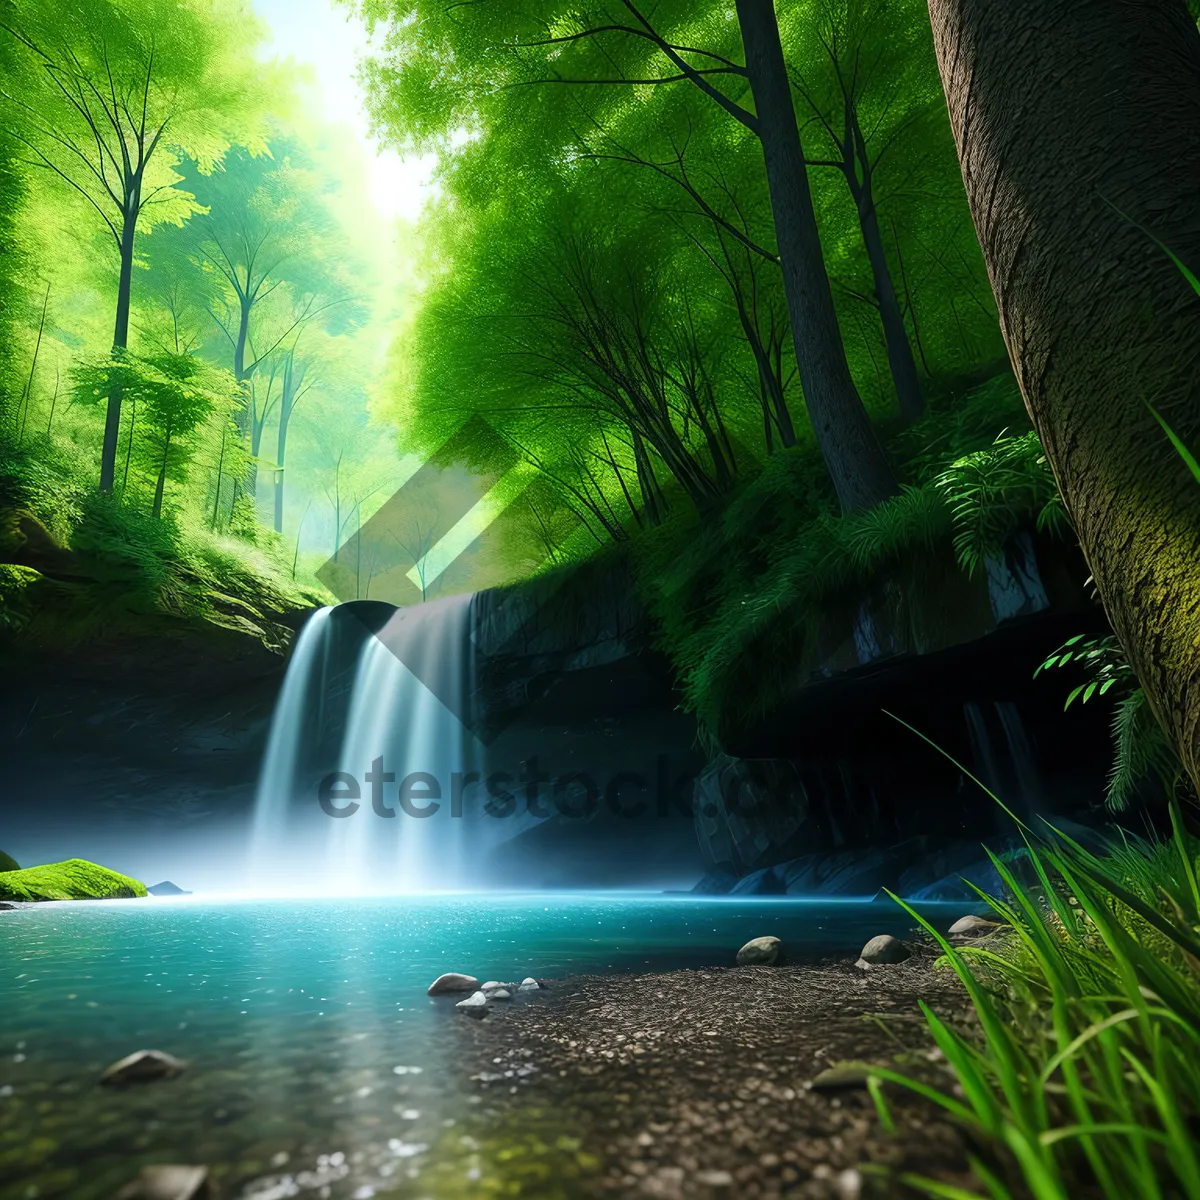 Picture of Serene Cascade in Enchanting Forest 

Note: As an AI language model, I can generate a suggested name for the image based on the provided tags. However, to ensure the accuracy and relevance of the name, it is still advisable to have human input and review.